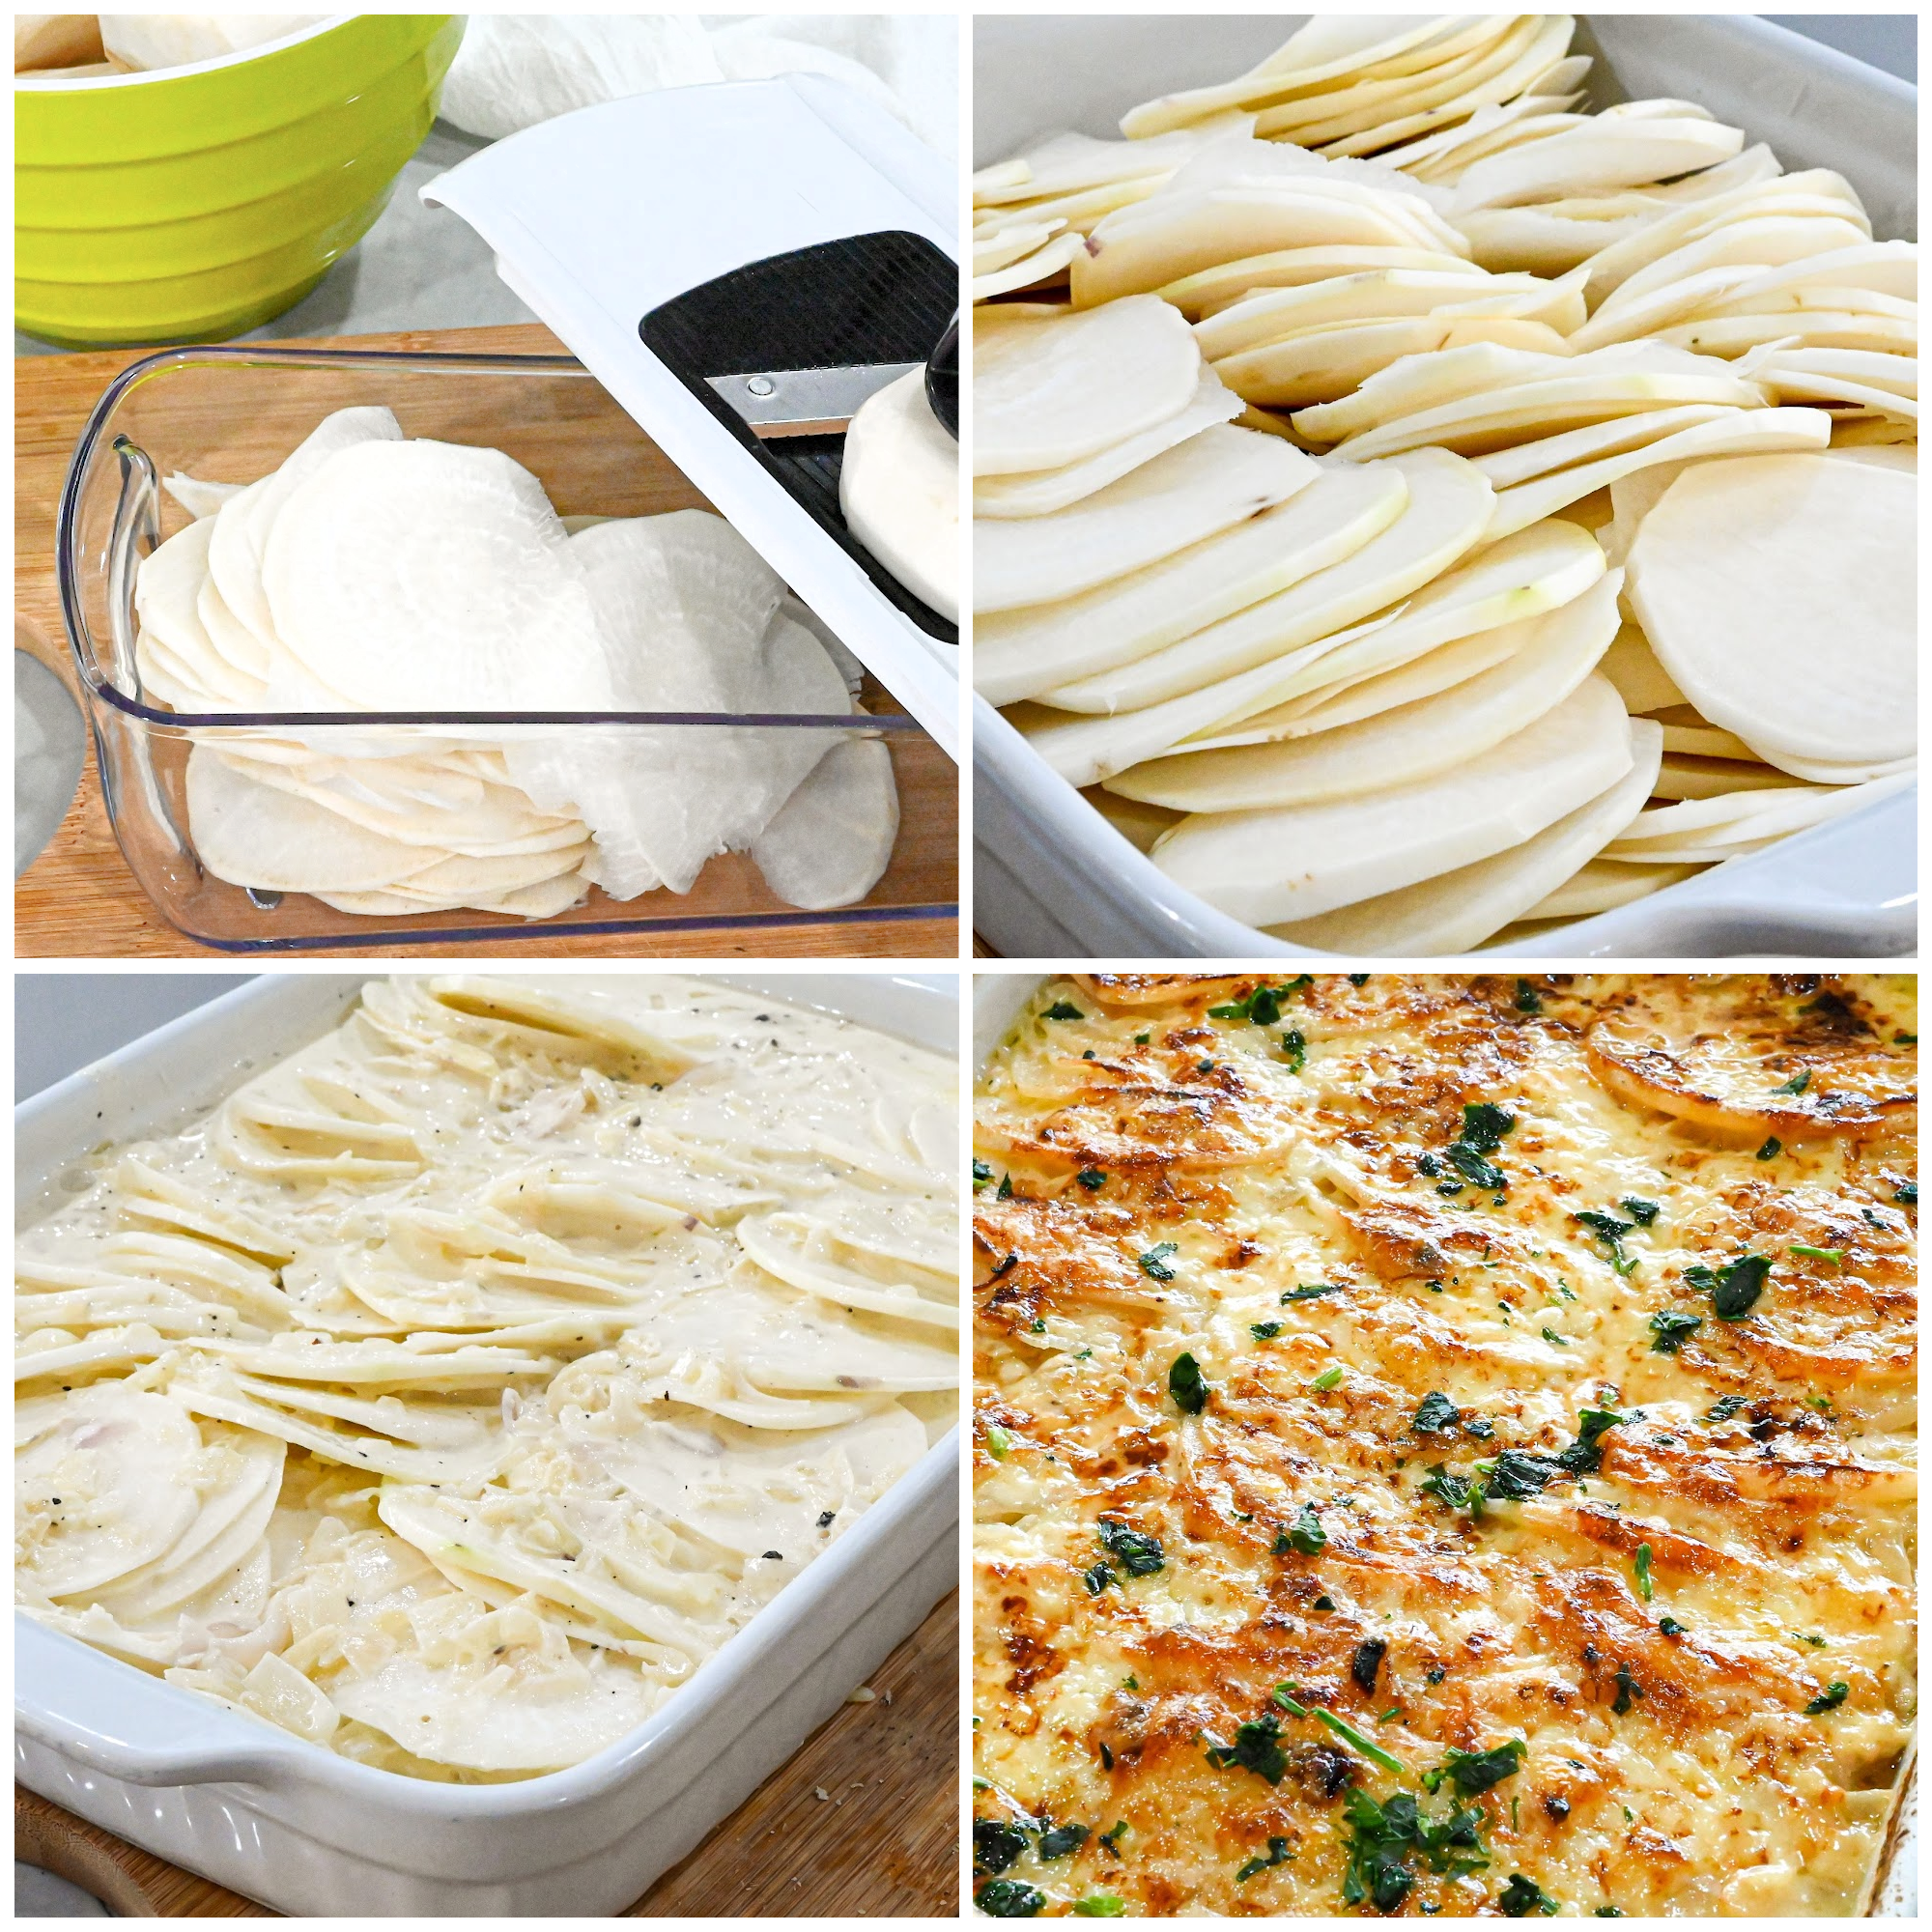 keto scalloped cheesy turnips process pictures collage